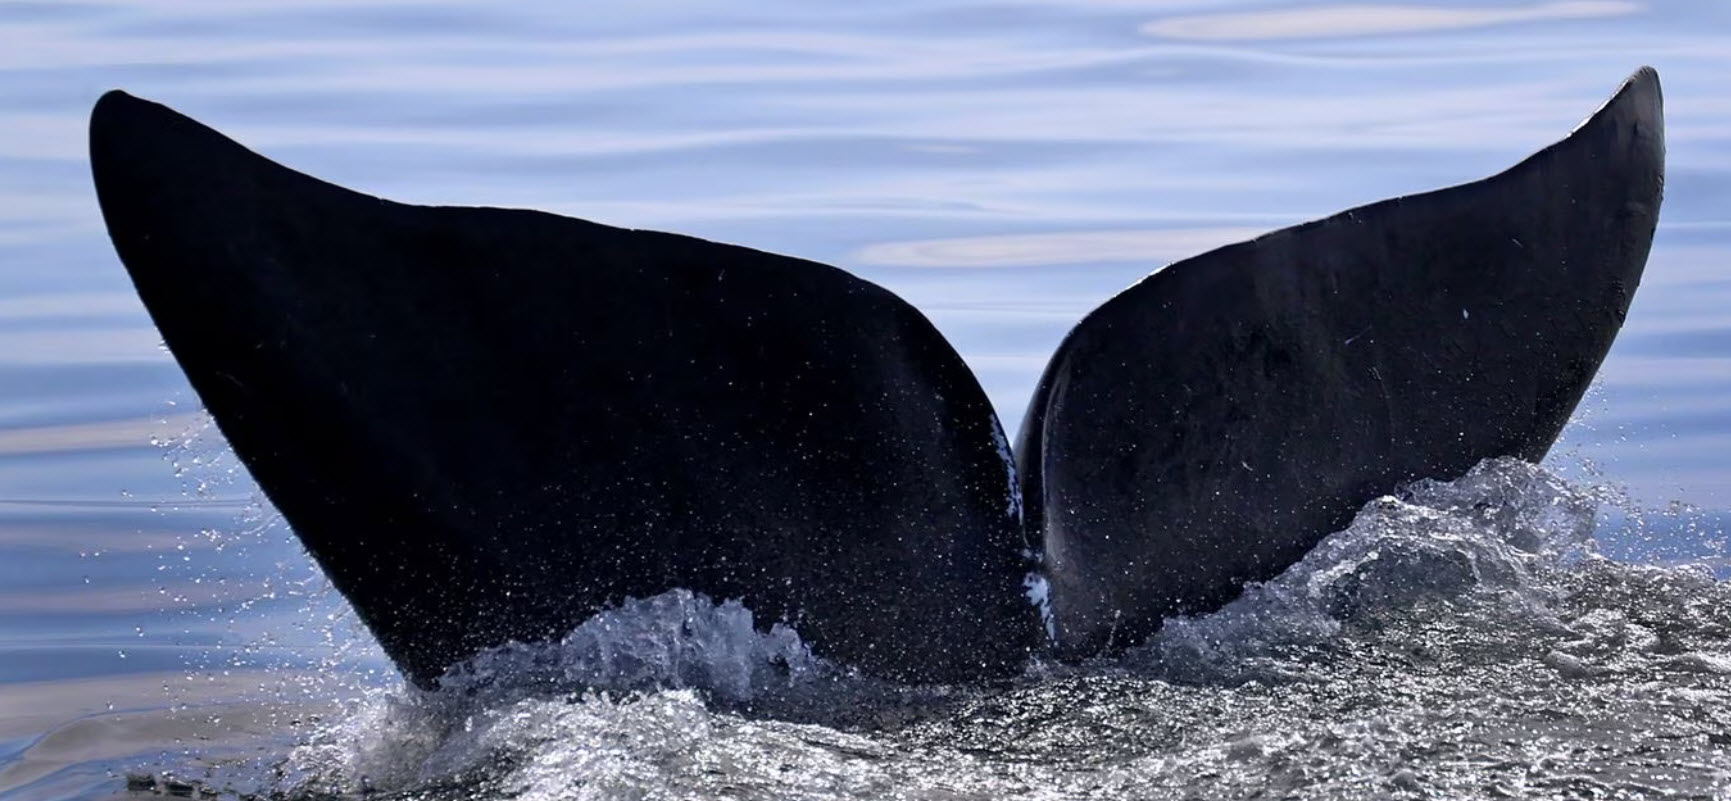 A (Right) Whale of a story